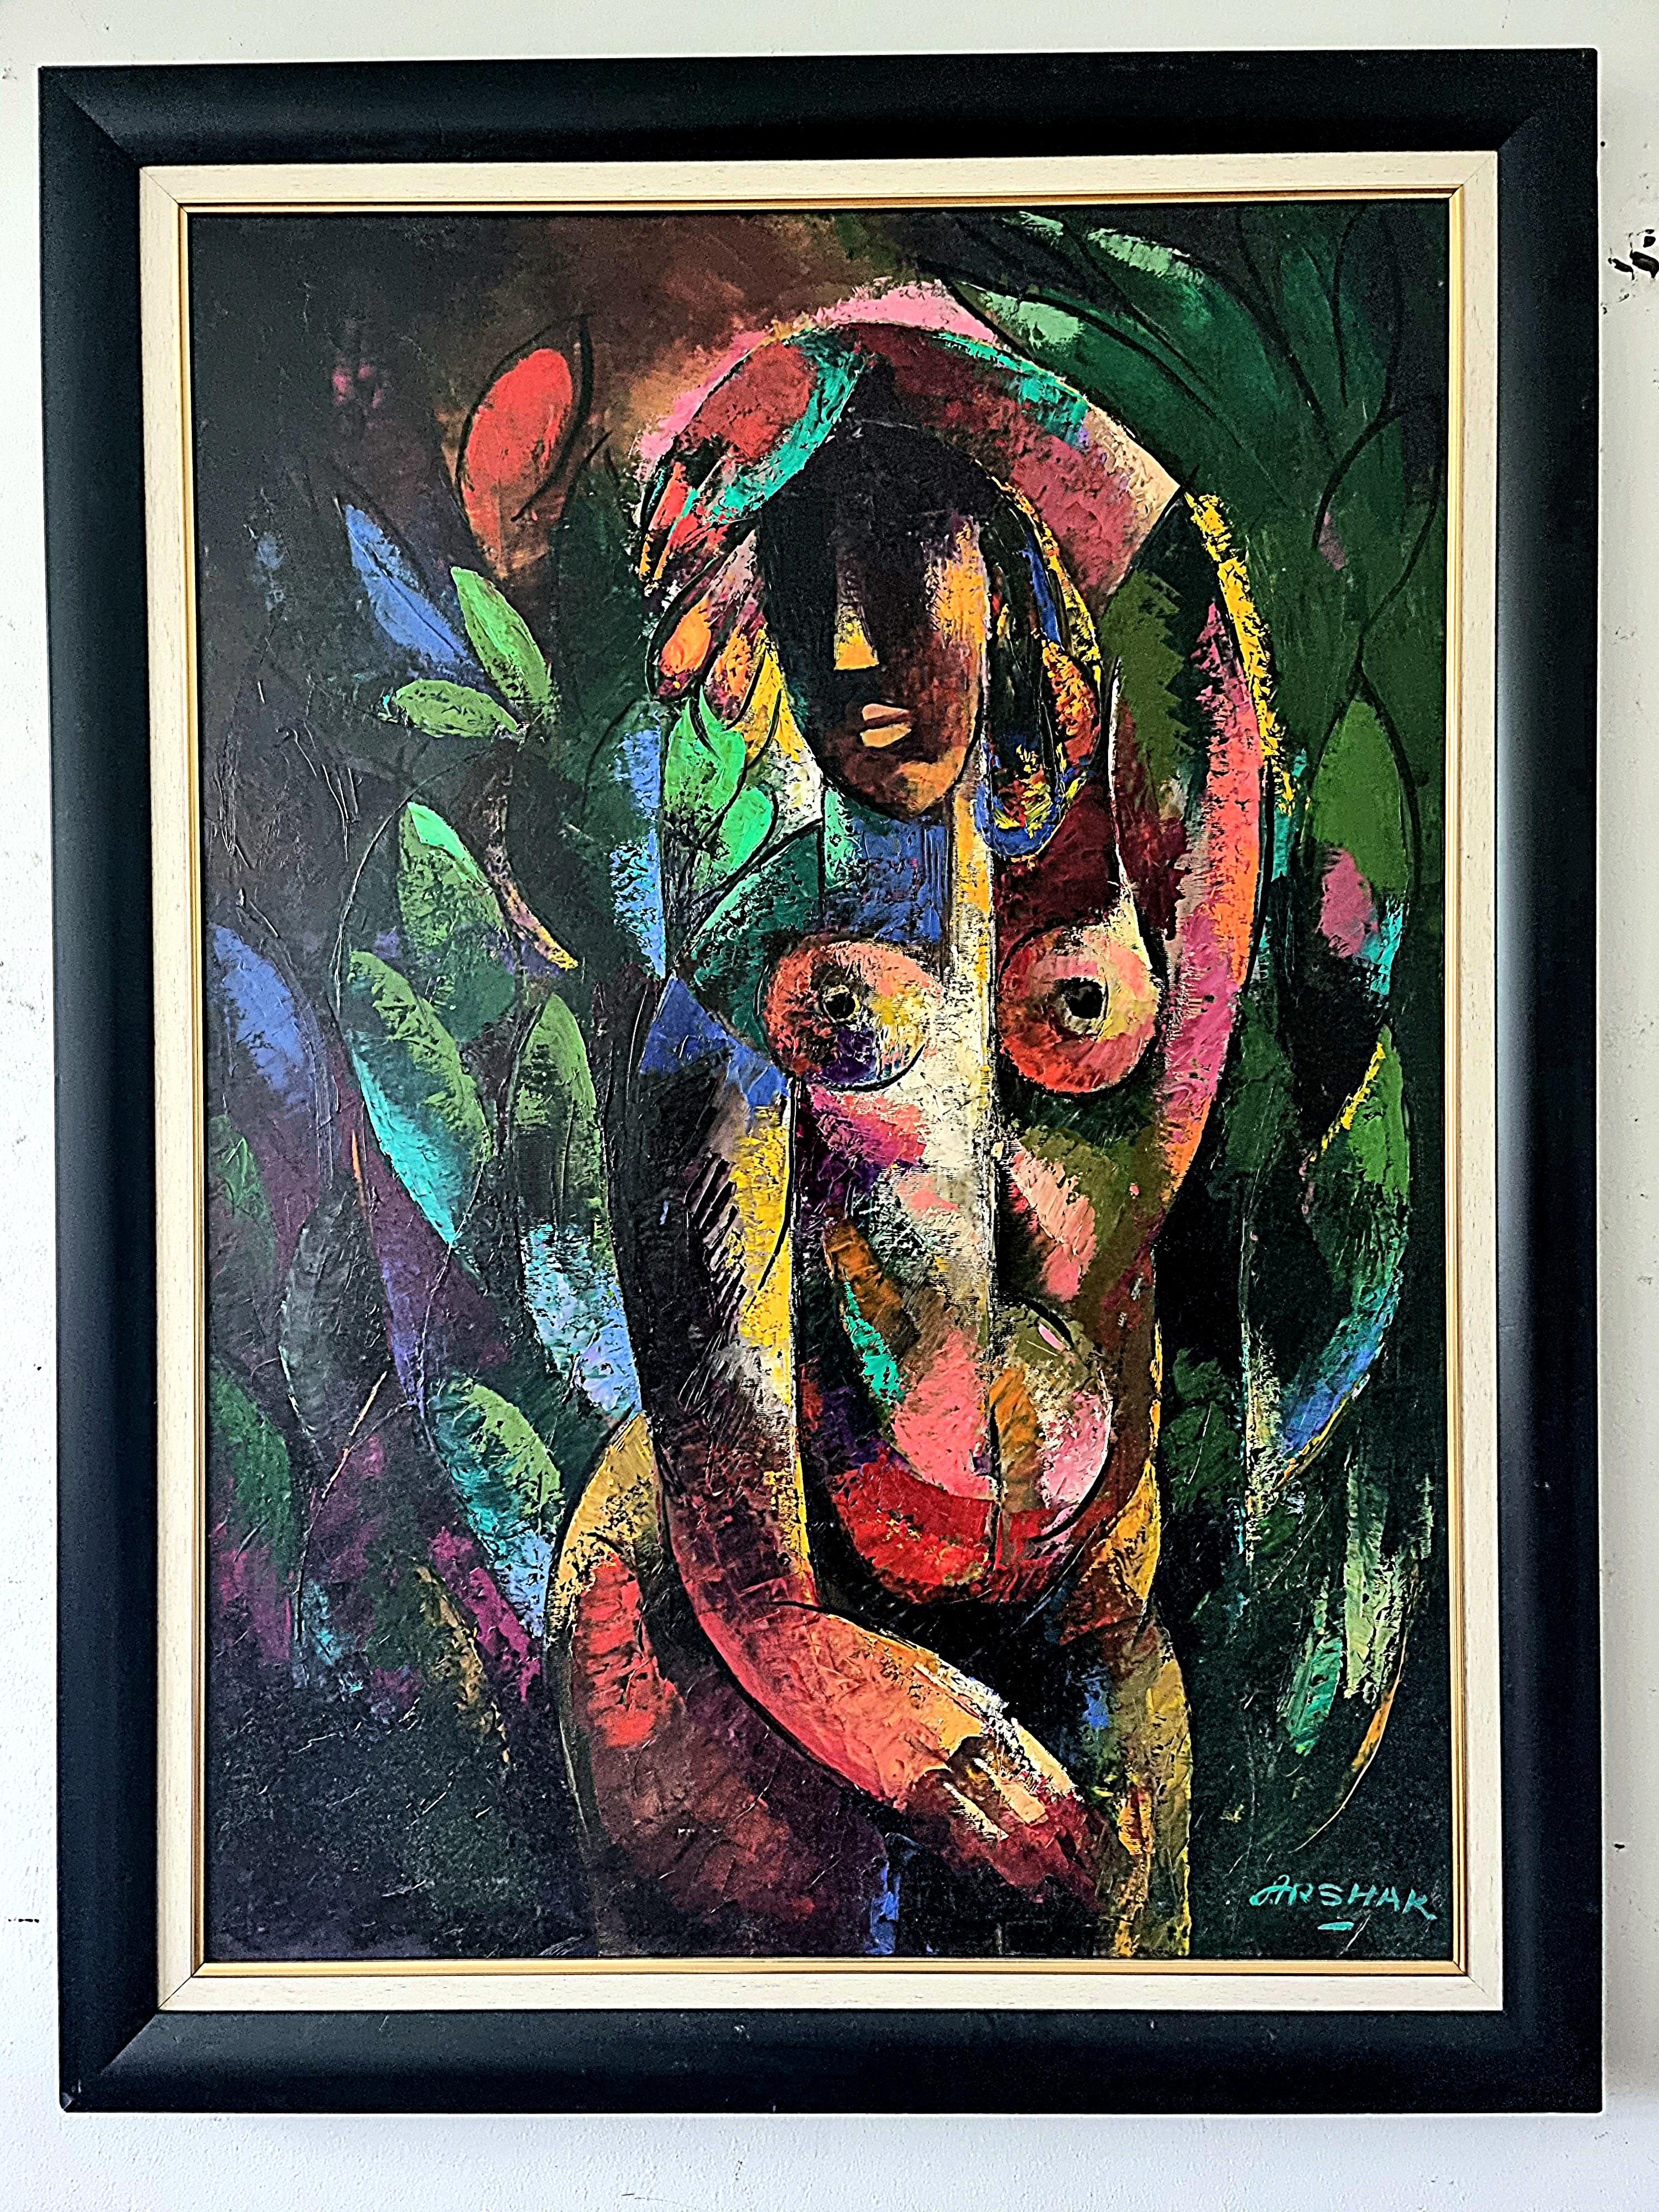 Woman's Figure - Cubist Art Red Black Yellow White Green Blue Pink Lilac - Painting by Arshak Nersisyan